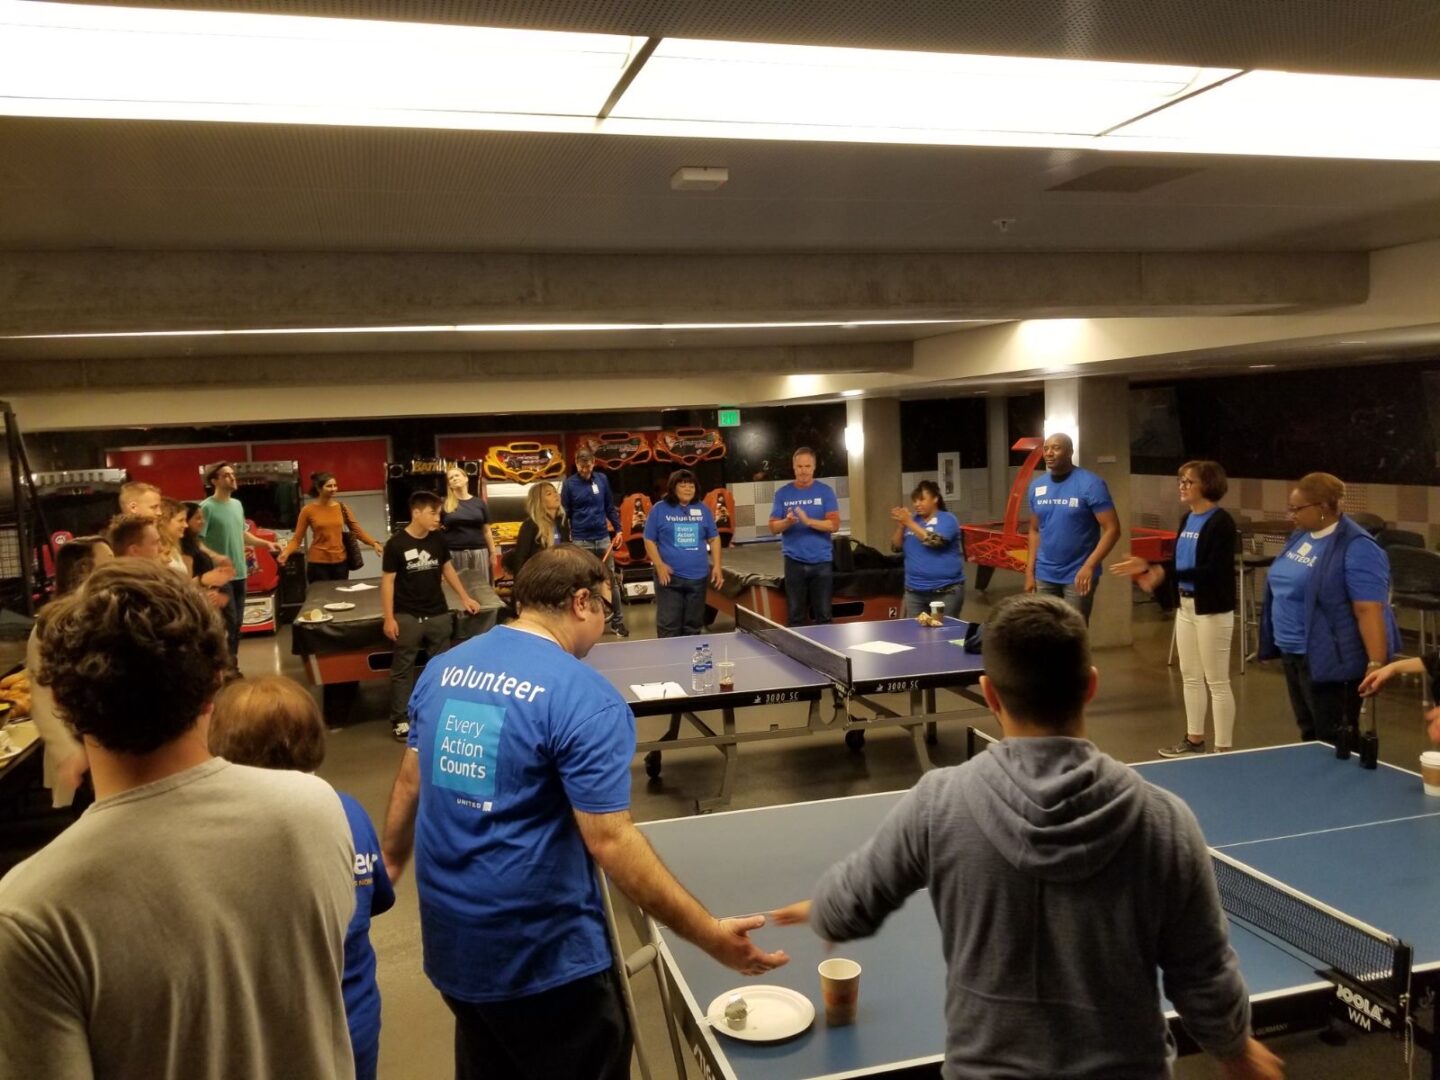 A group of people standing around ping pong tables.